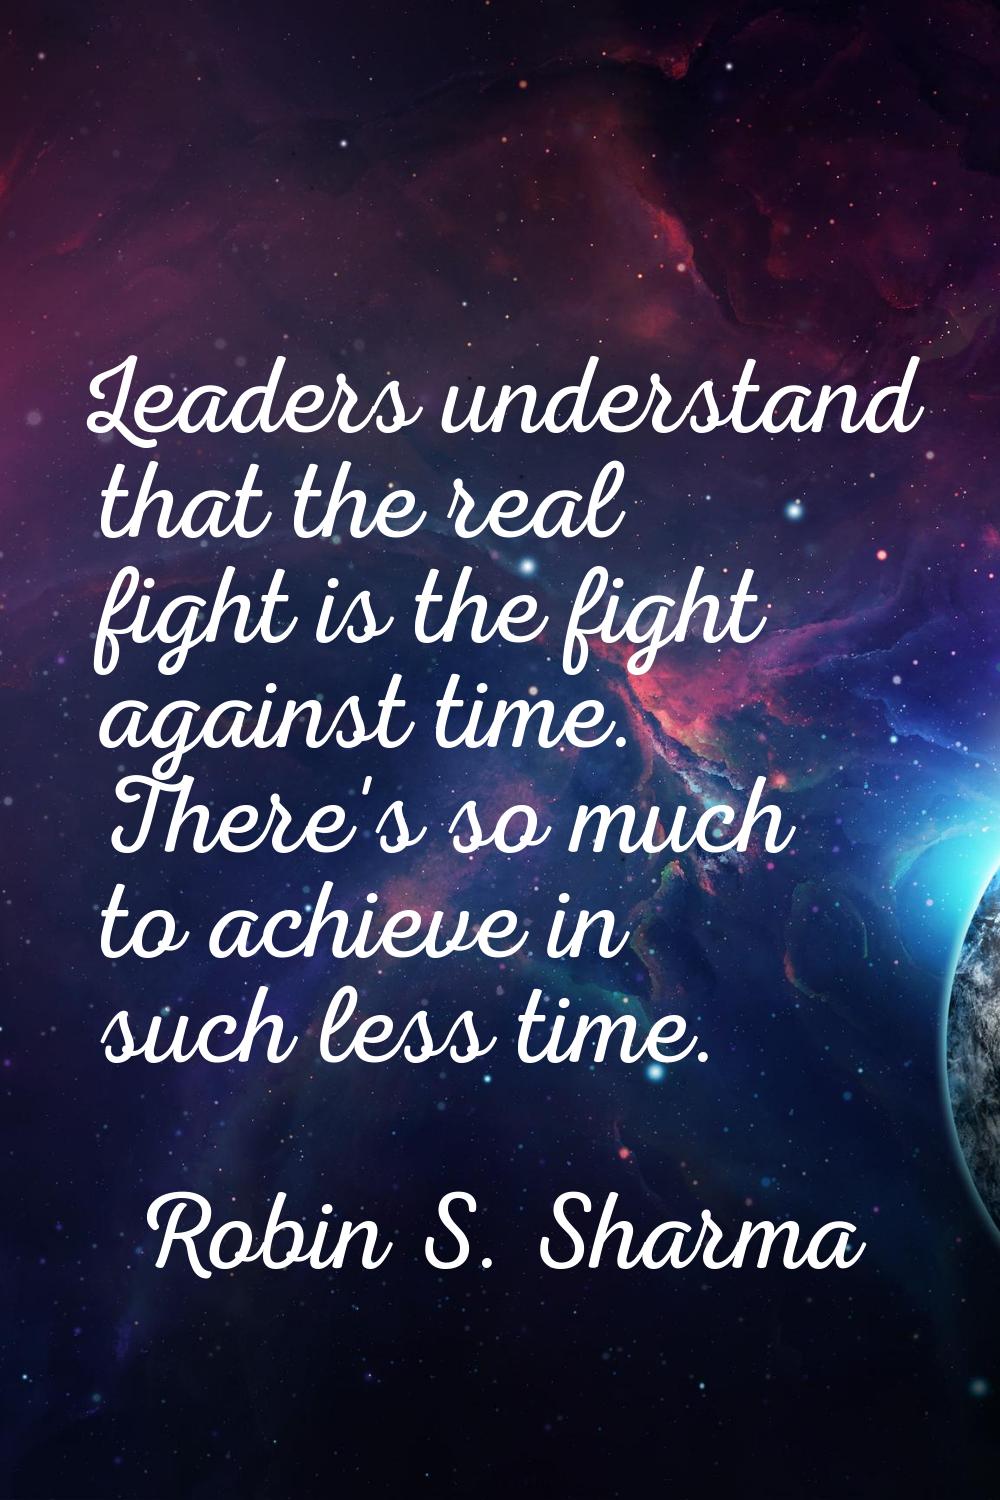 Leaders understand that the real fight is the fight against time. There's so much to achieve in suc